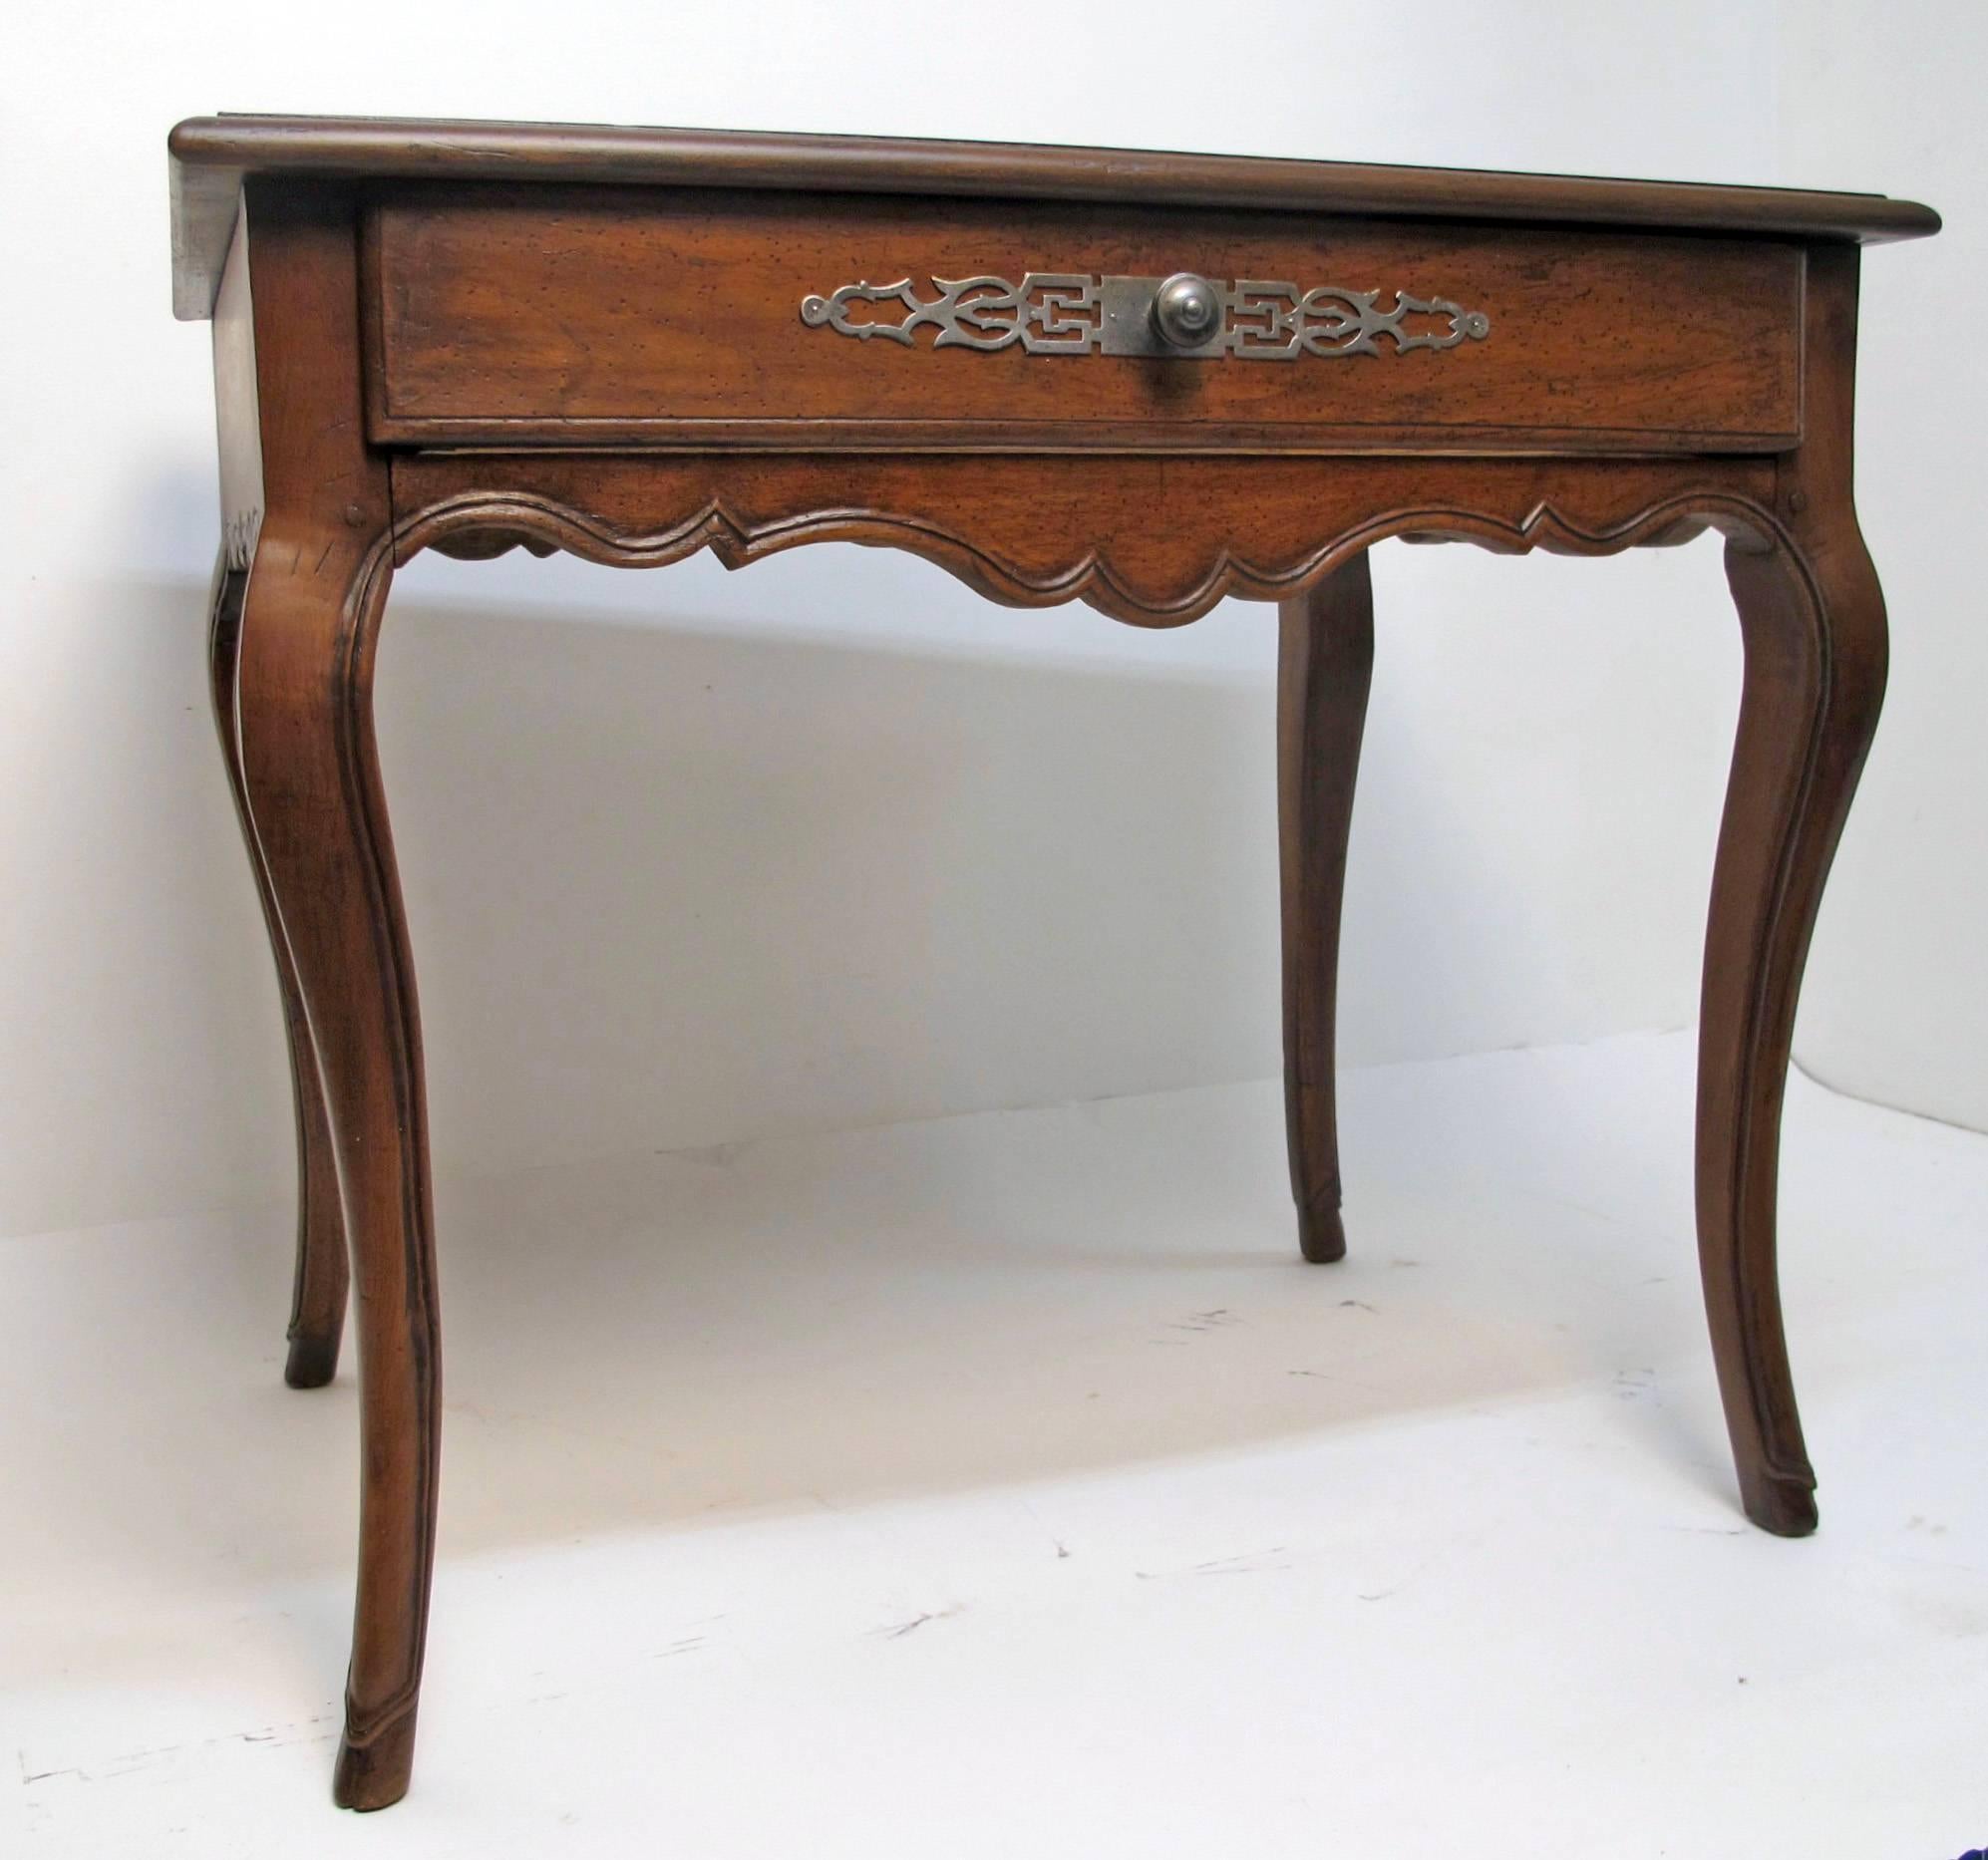 A Louis XVI carved walnut writing table with a tooled inset brown leather top, standing on elegant cabriole legs ending on cloven hoof feet. Having single center drawer with a decorative steel plate and knob.  
French Circa 1780.
